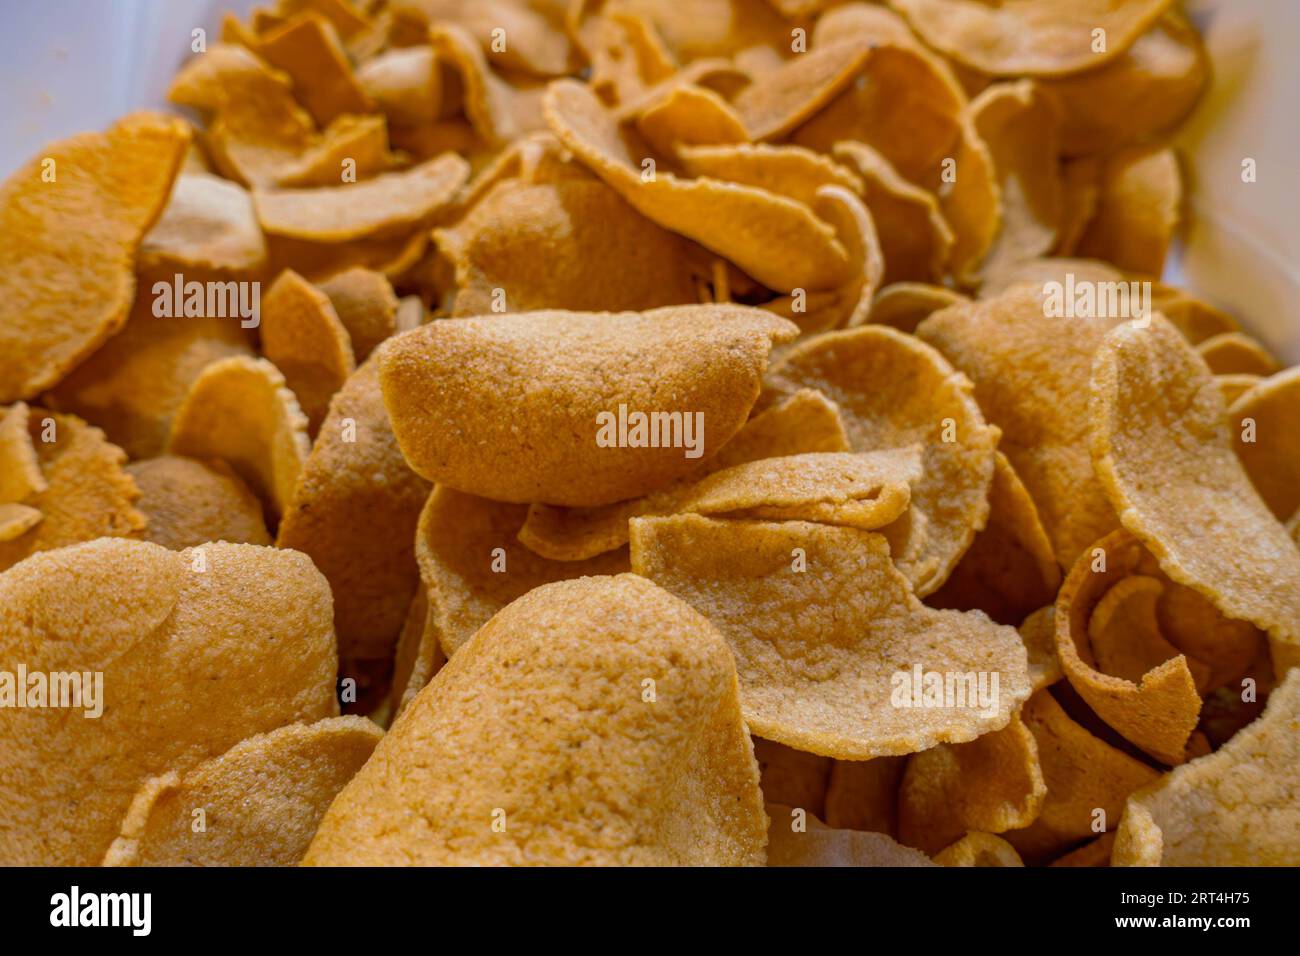 A close up view of a tray of prawn crackers Stock Photo